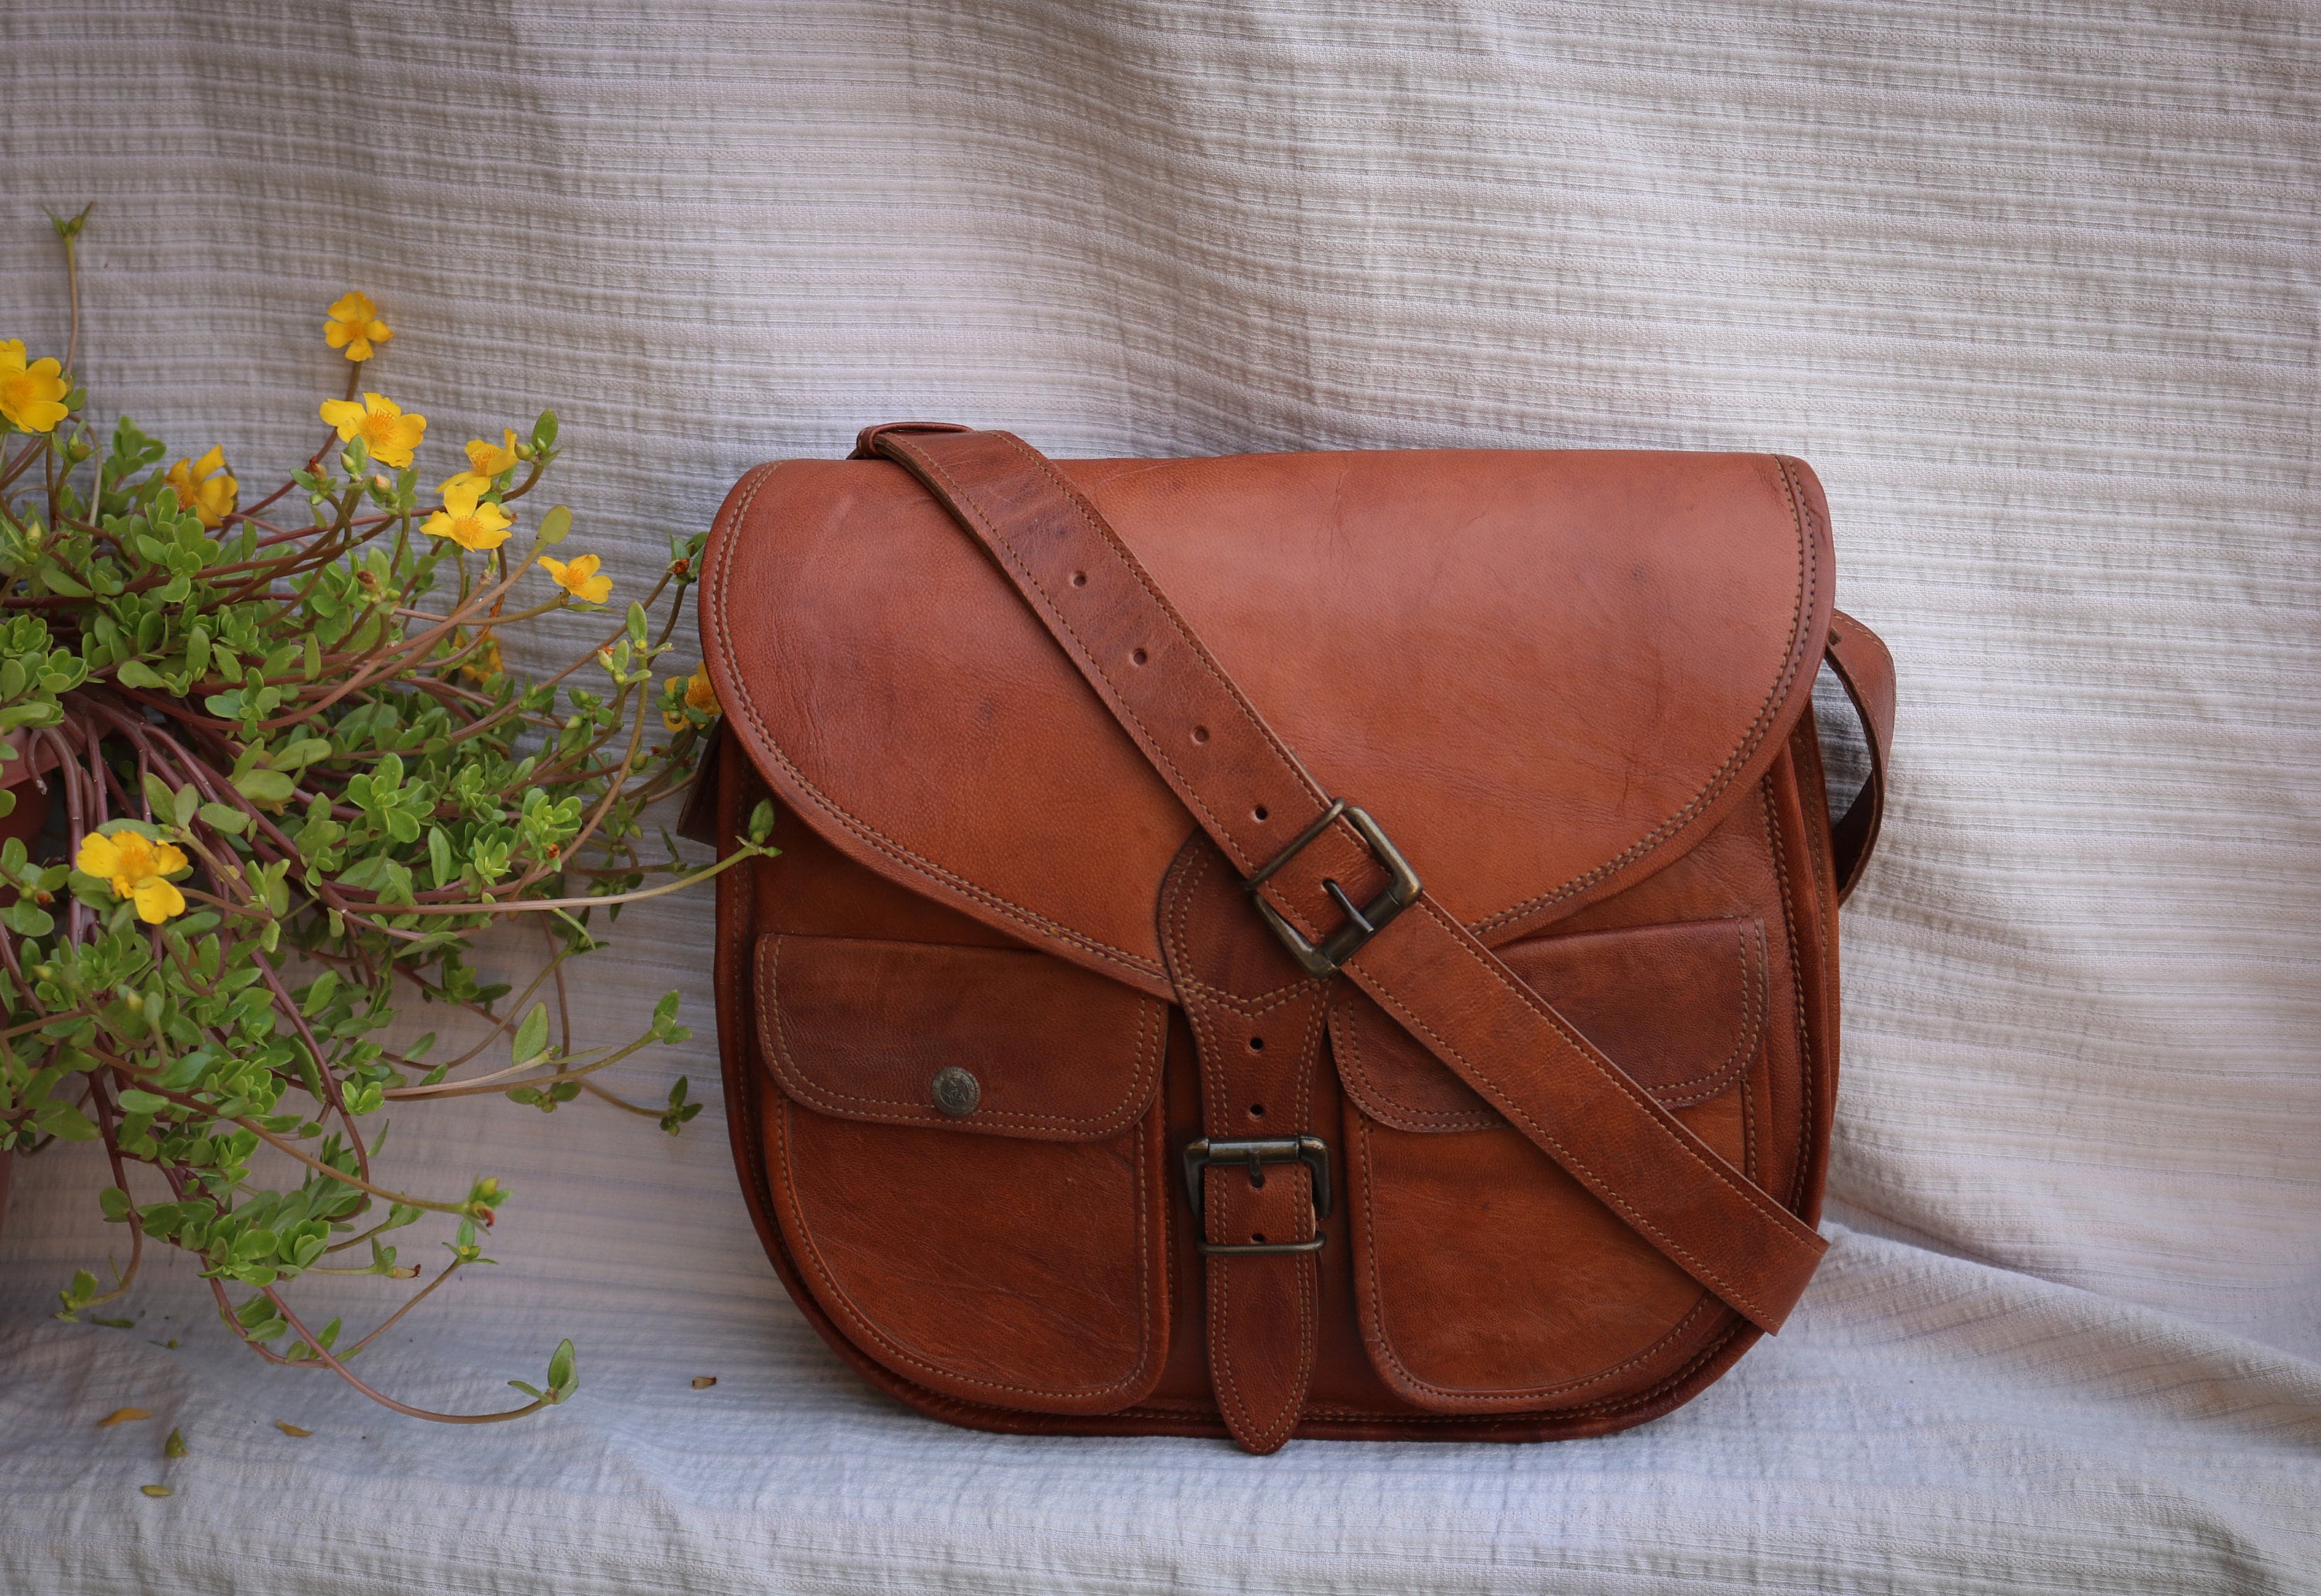 Roots - Introducing the Ella Bag! A simple, stylish... | Facebook